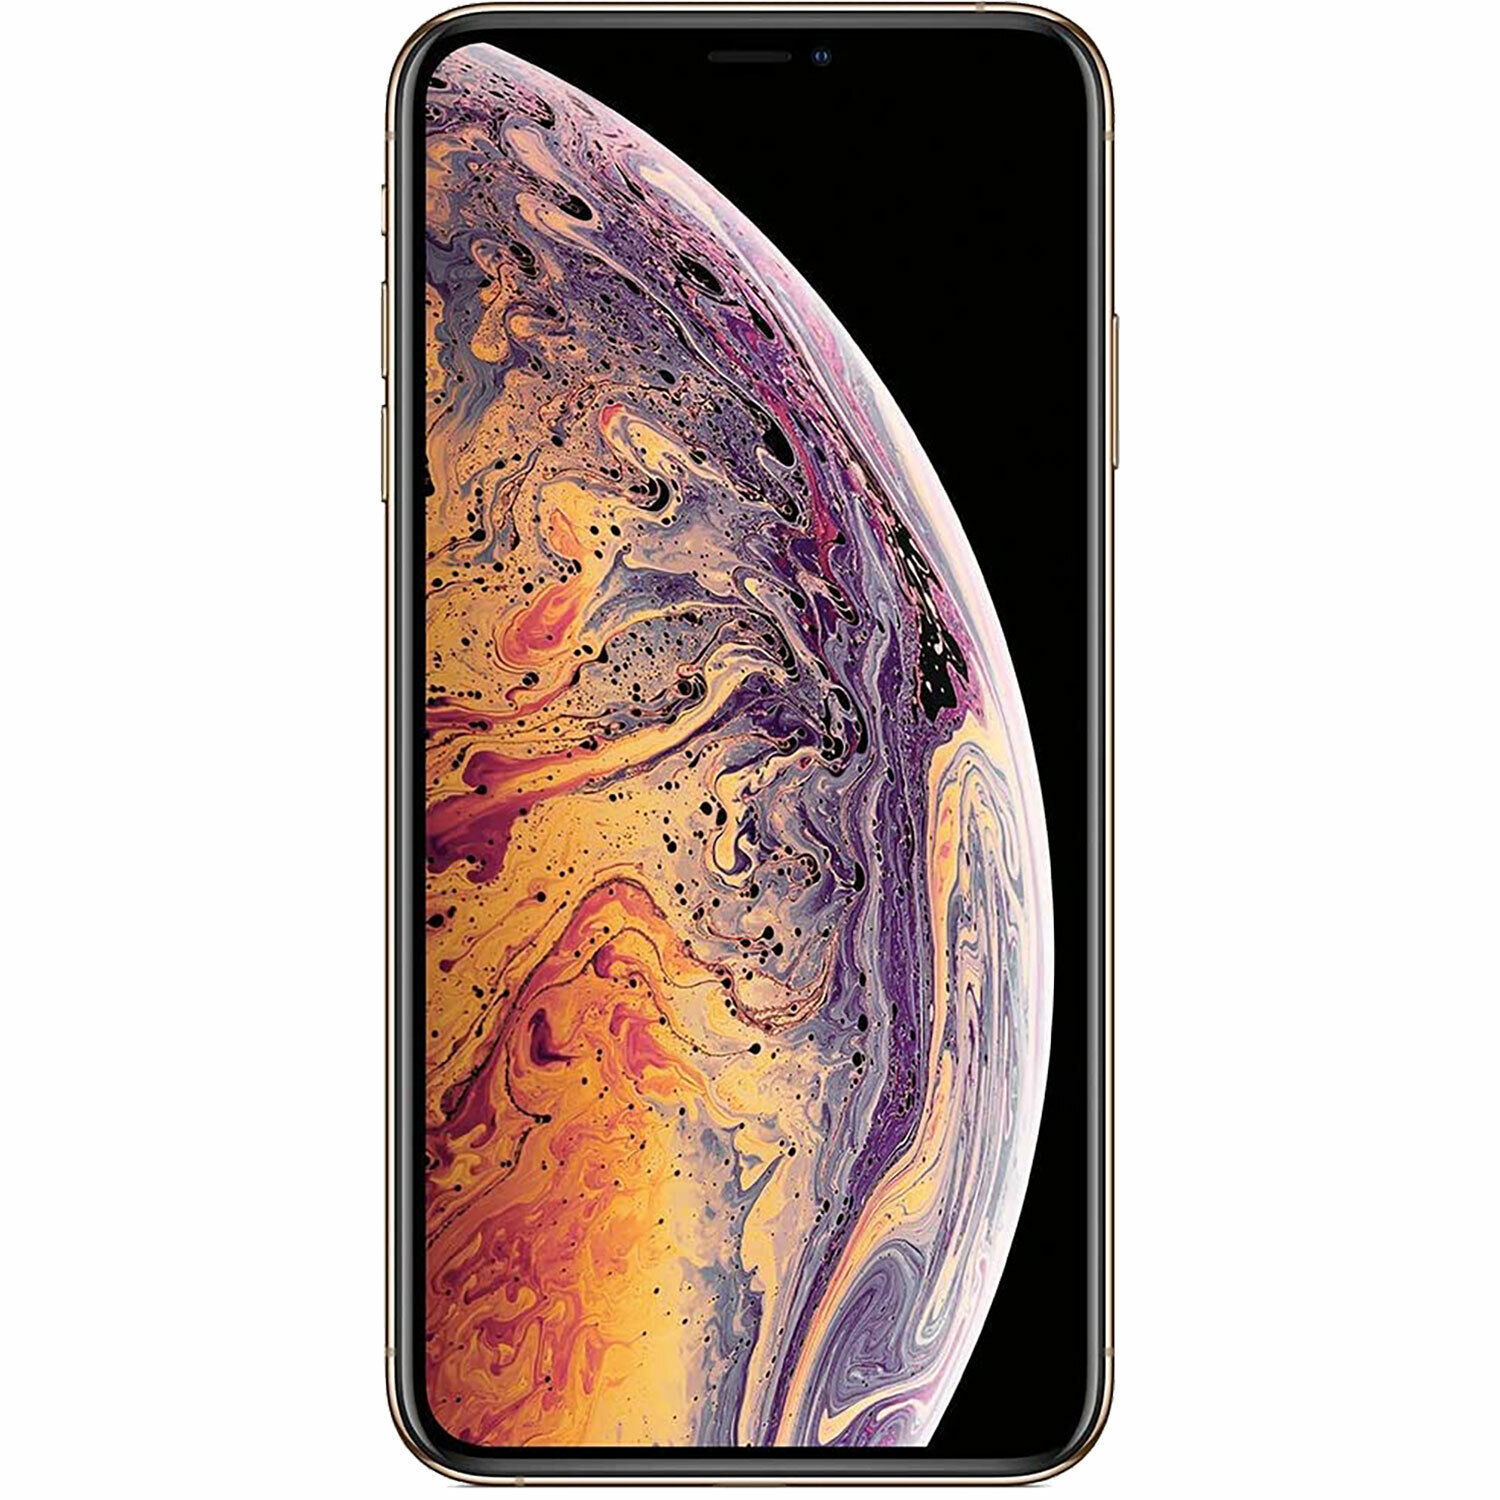 Apple iPhone XS Max- 512Gb- Gold (Unlocked) for sale online | eBay